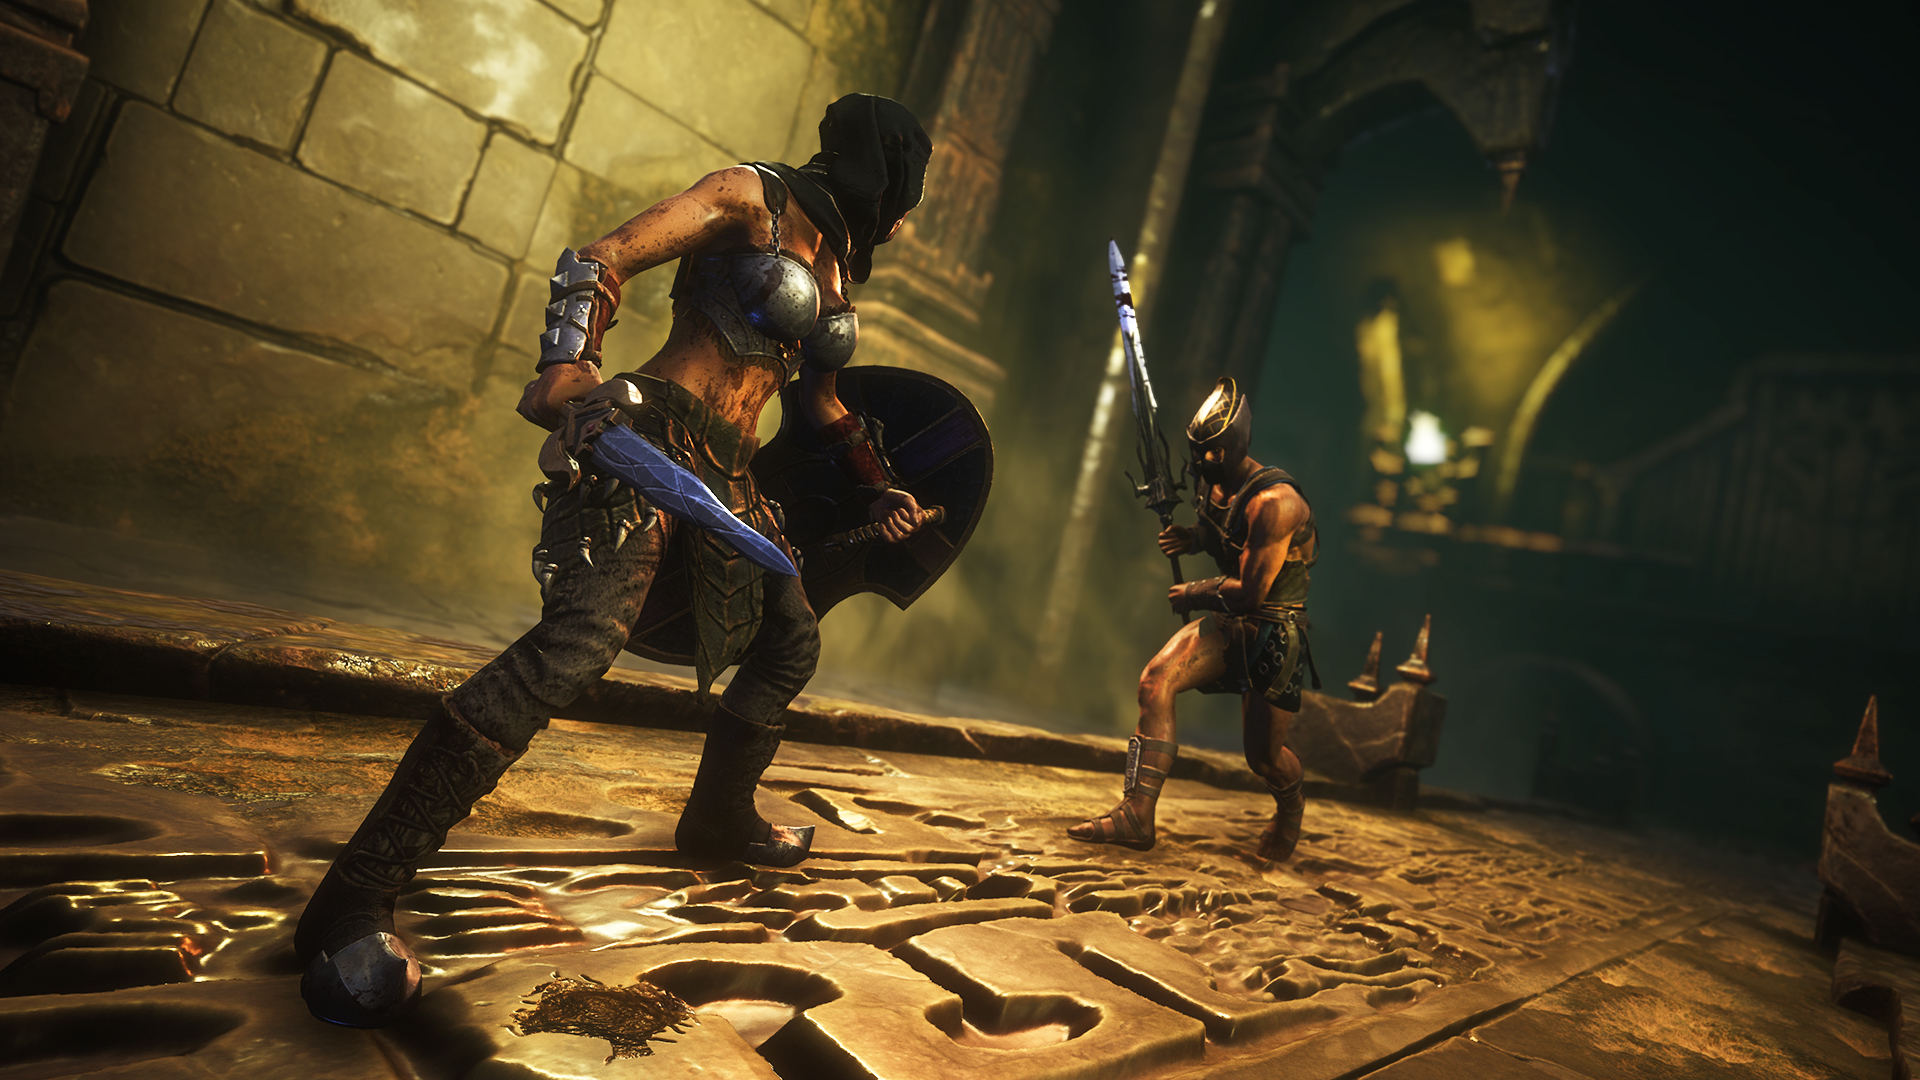 How To Host A Conan Exiles Dedicated Server In 19 A Step By Step Guide